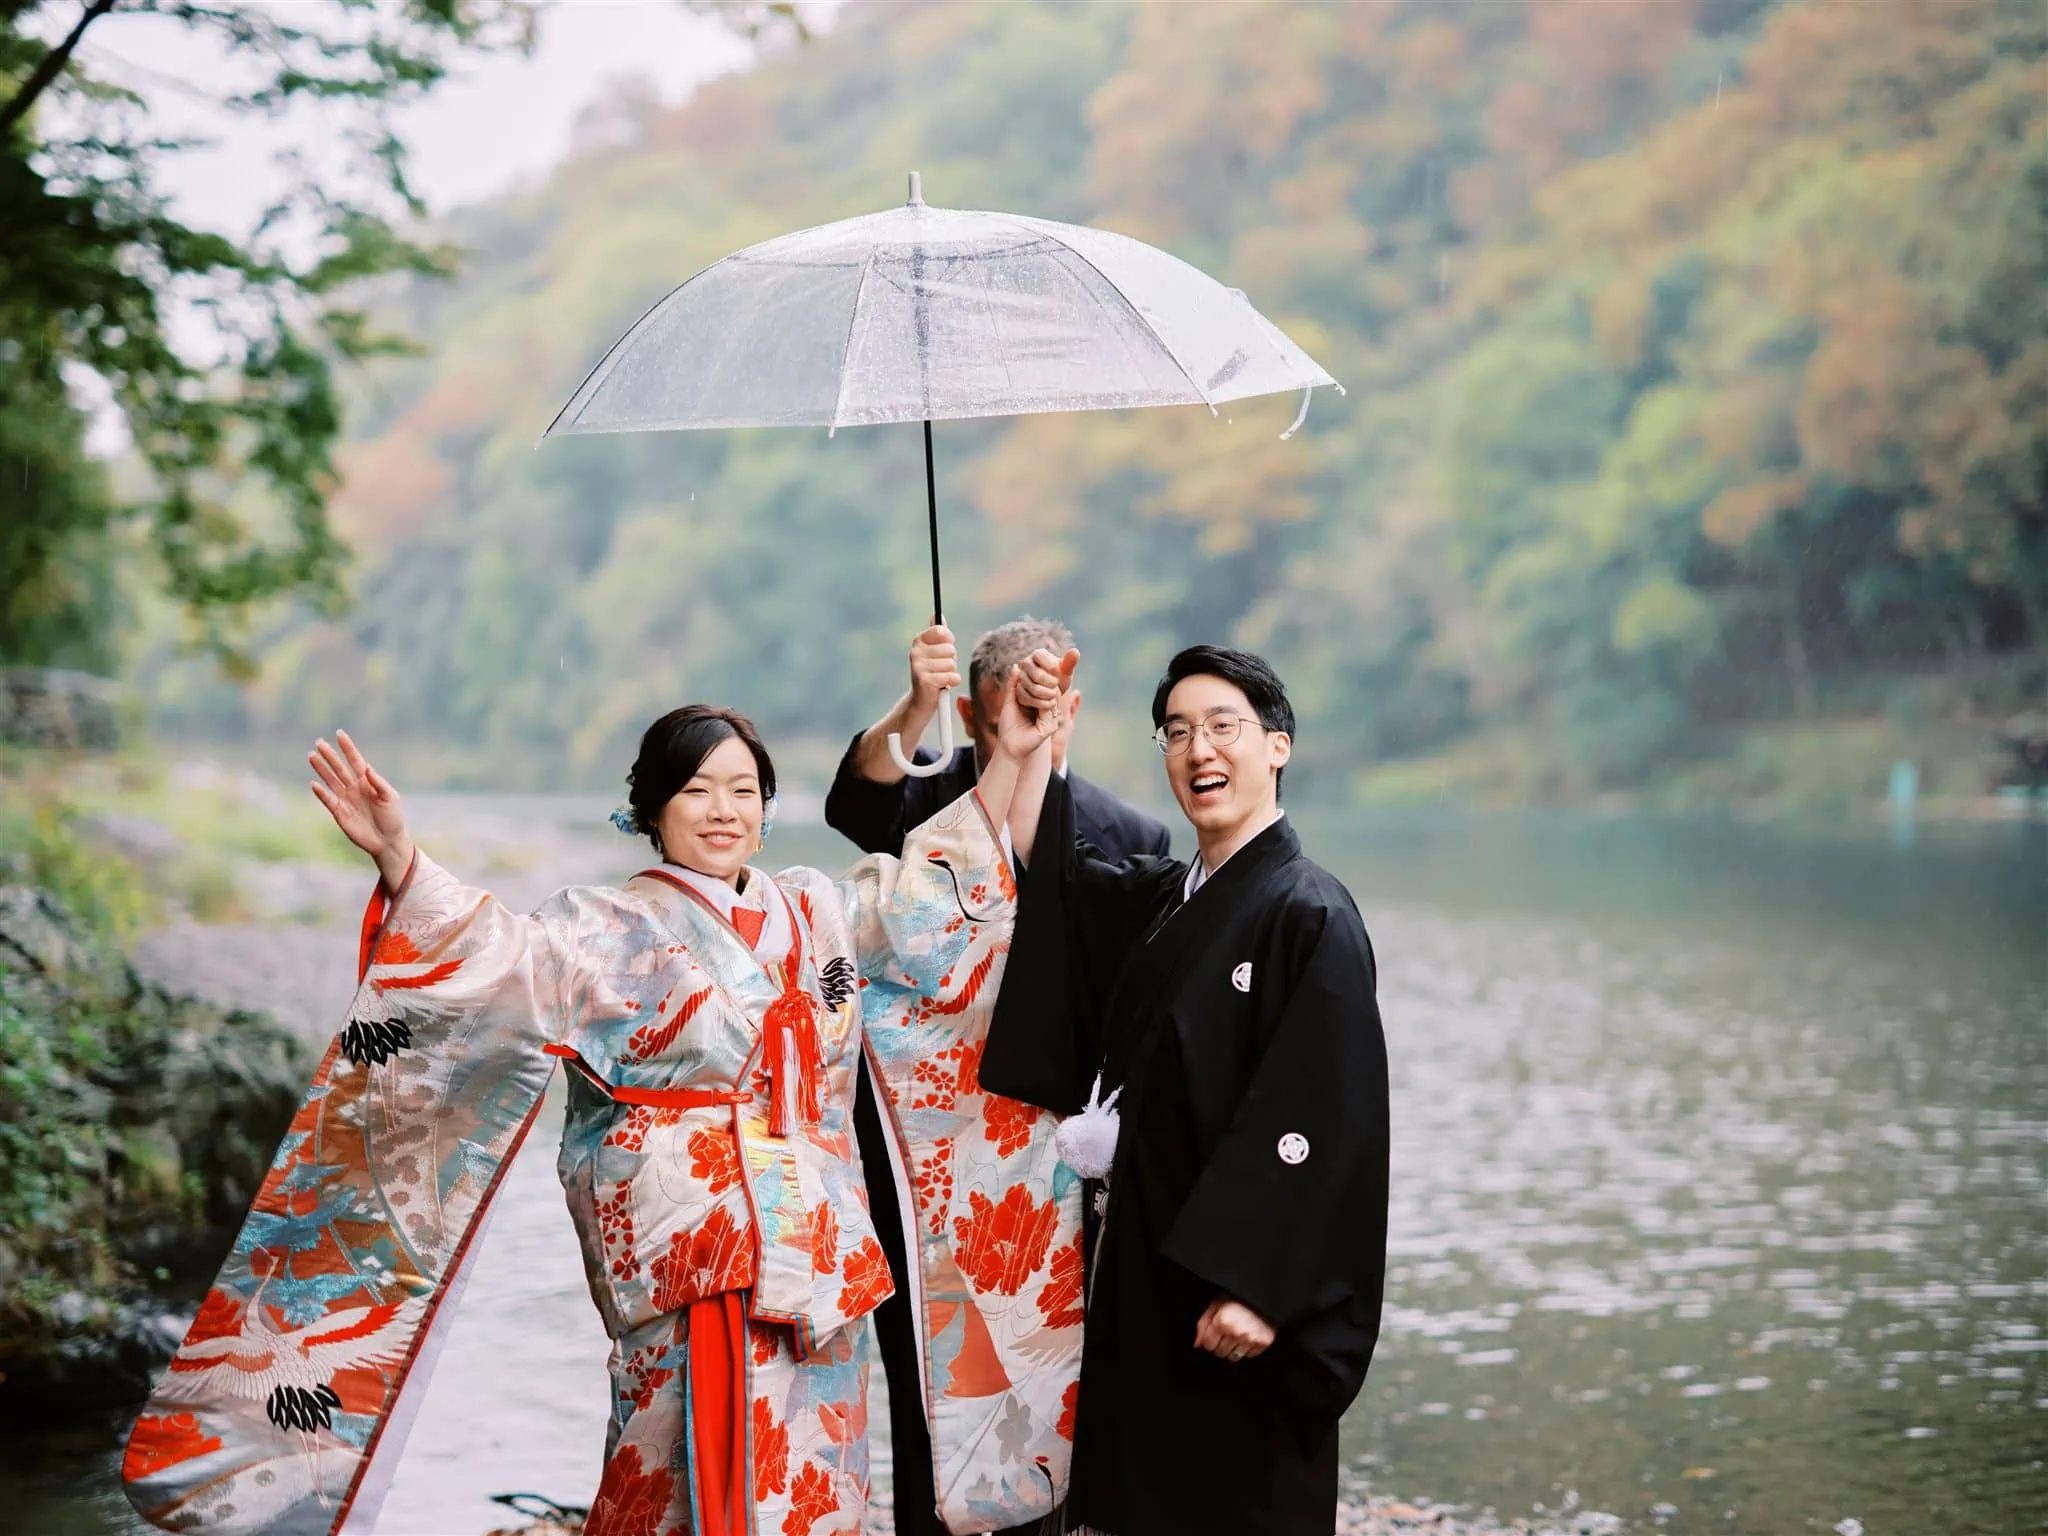 Kyoto Tokyo Japan Elopement Wedding Photographer, Planner & Videographer | A group of traditional Japanese kimono clad individuals elegantly holding umbrellas, captured by a skilled elopement photographer.